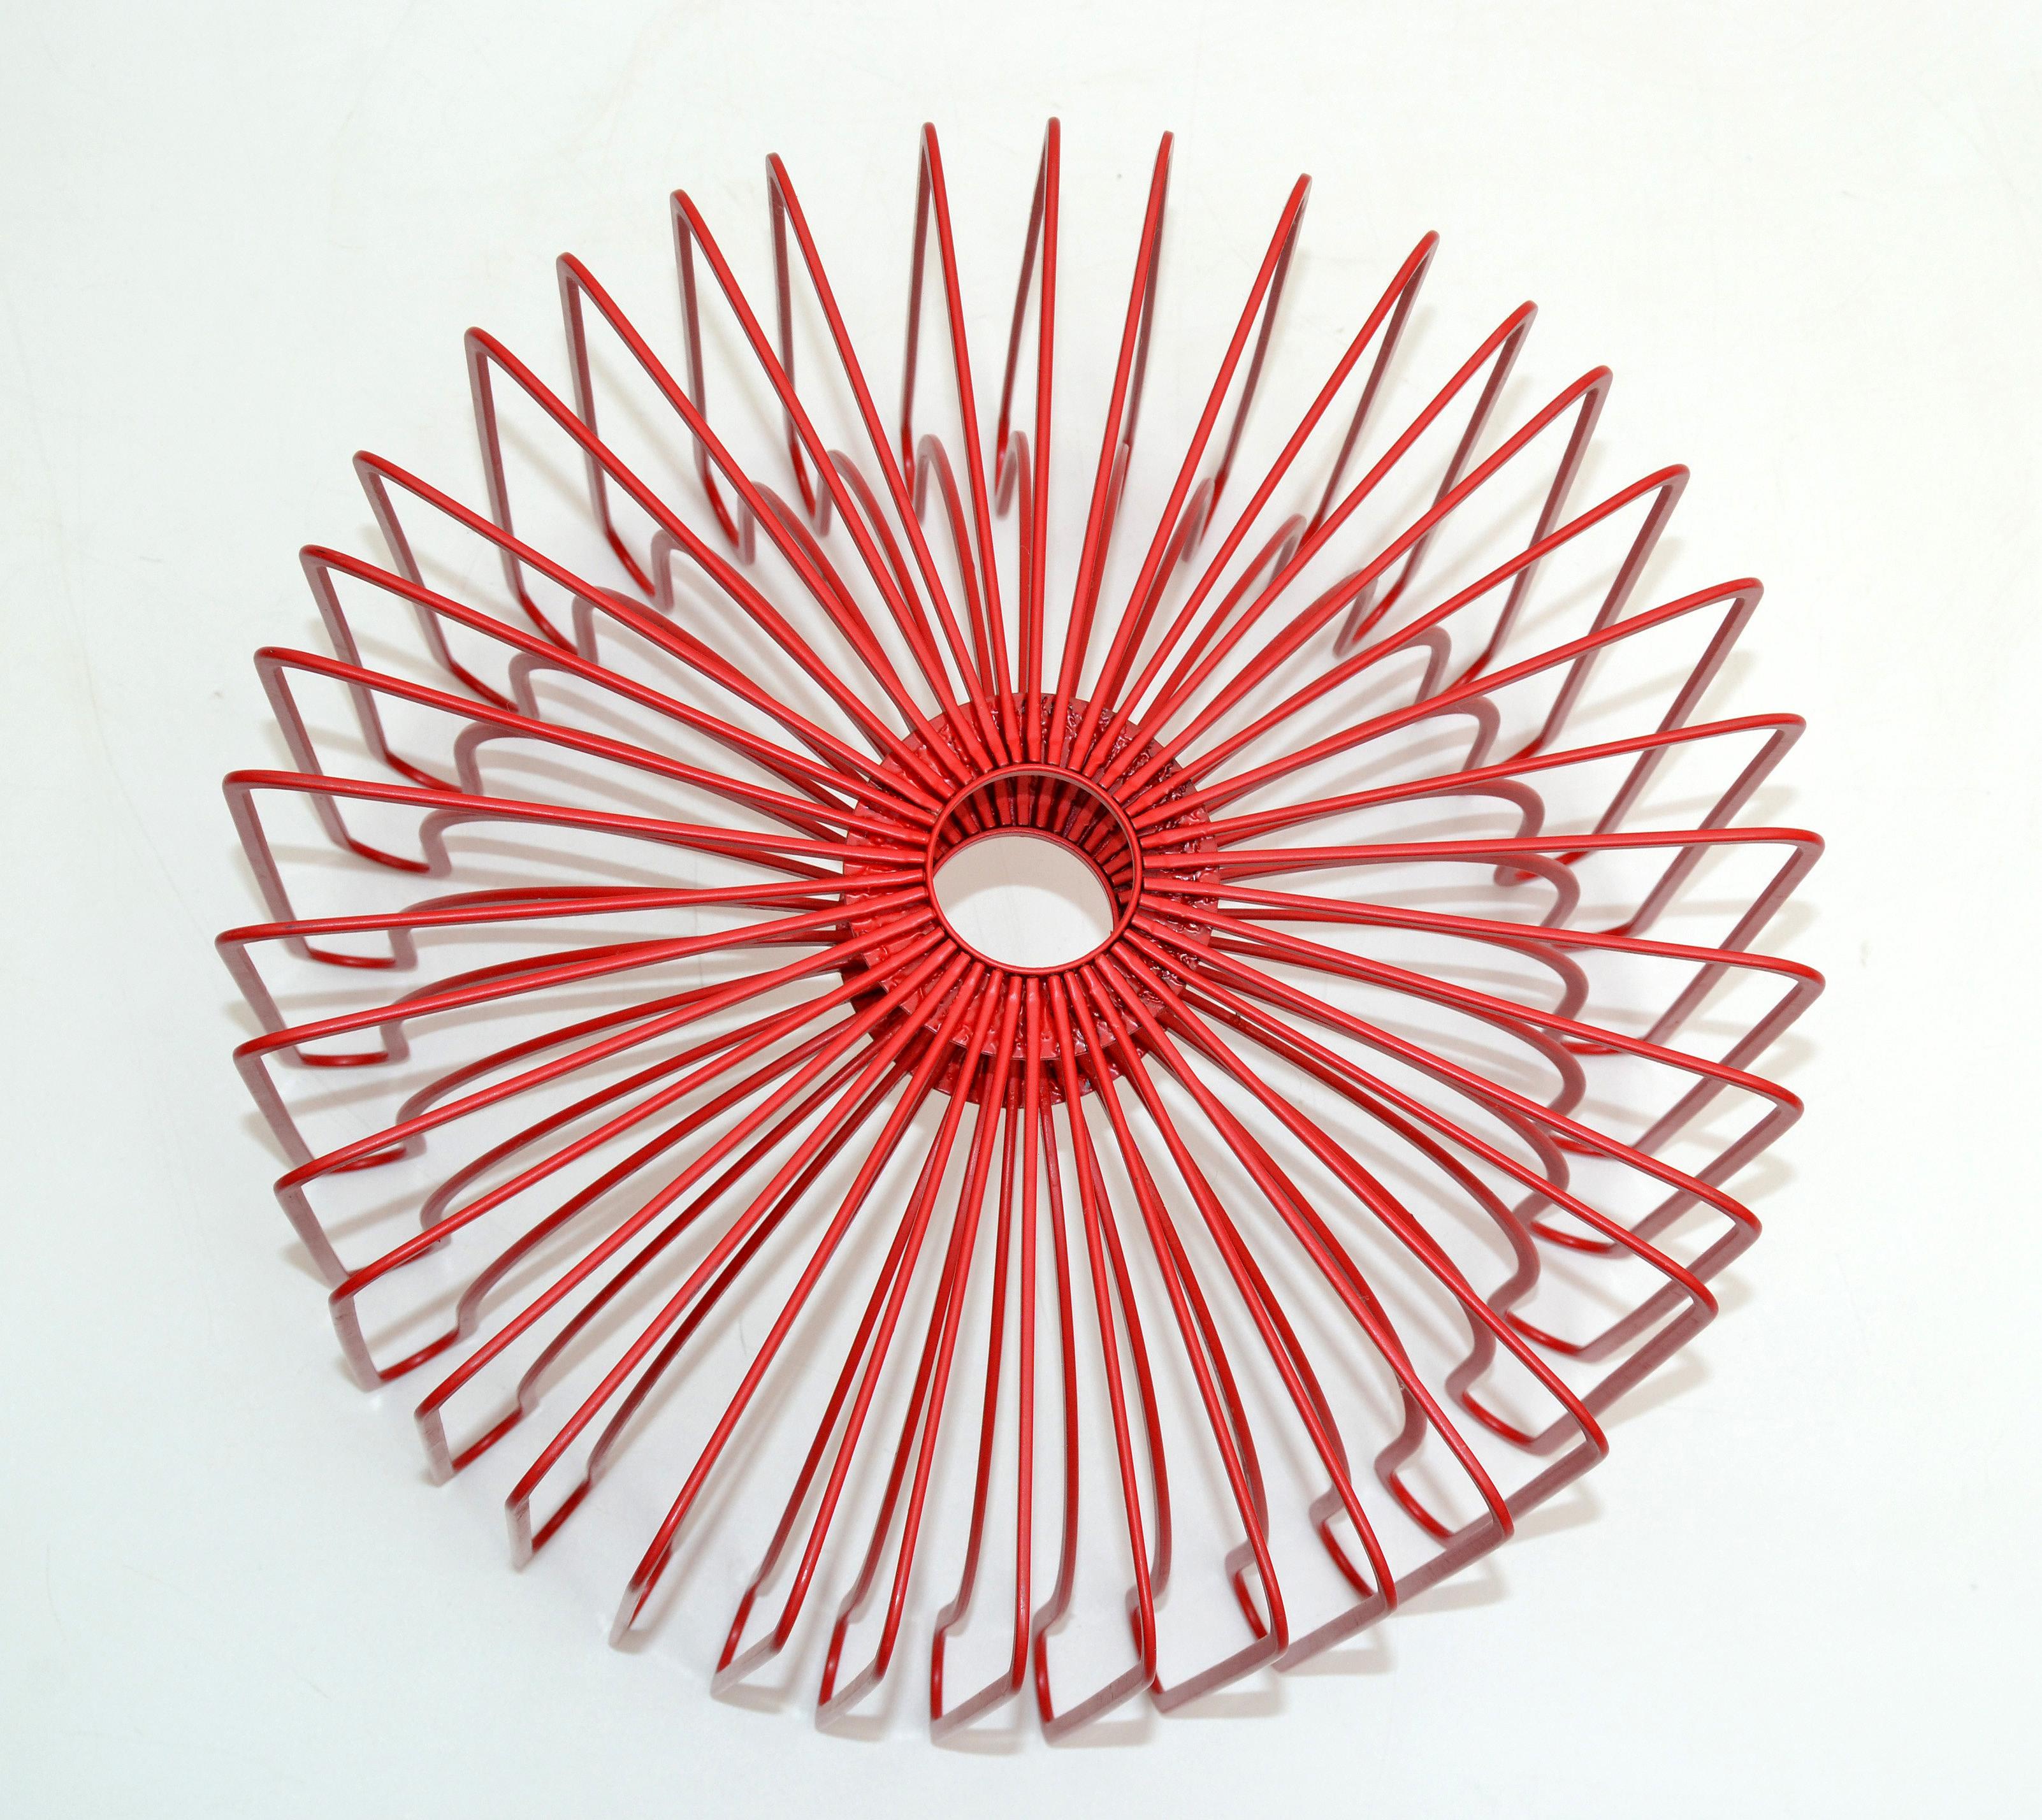 Scandinavian Modern Sculptural Red Metal Bowl, Centerpiece Made in Sweden 1980s In Good Condition For Sale In Miami, FL